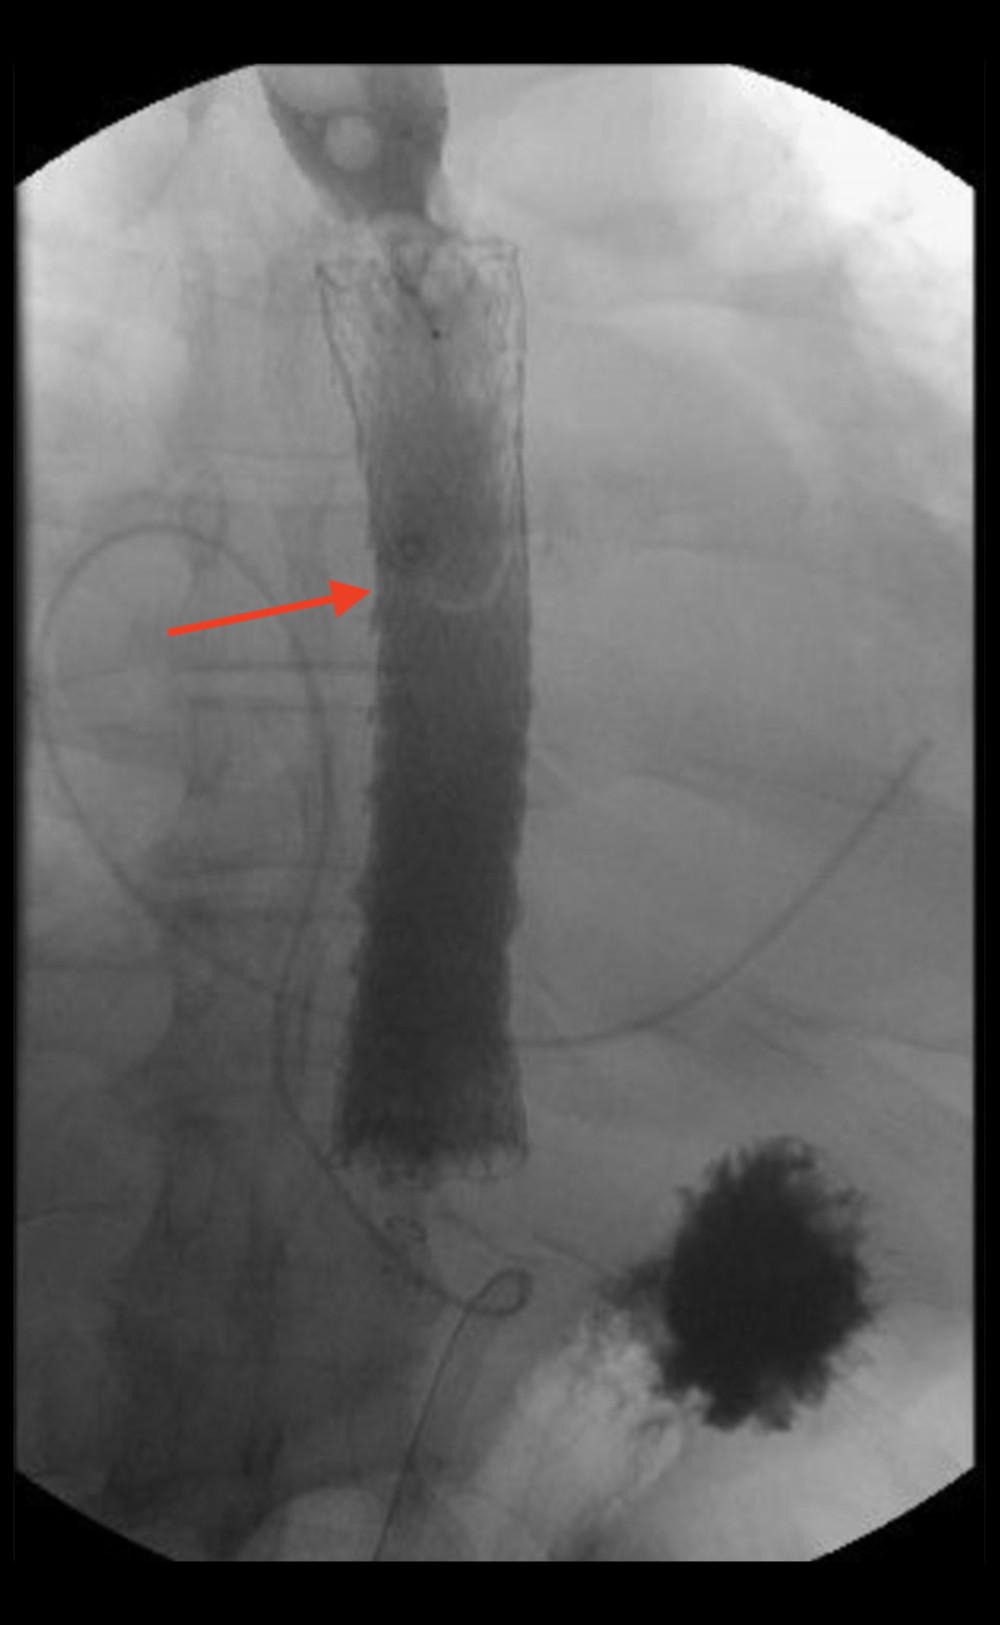 Fluoroscopic image showing a mid-distal esophageal stent (red arrow).